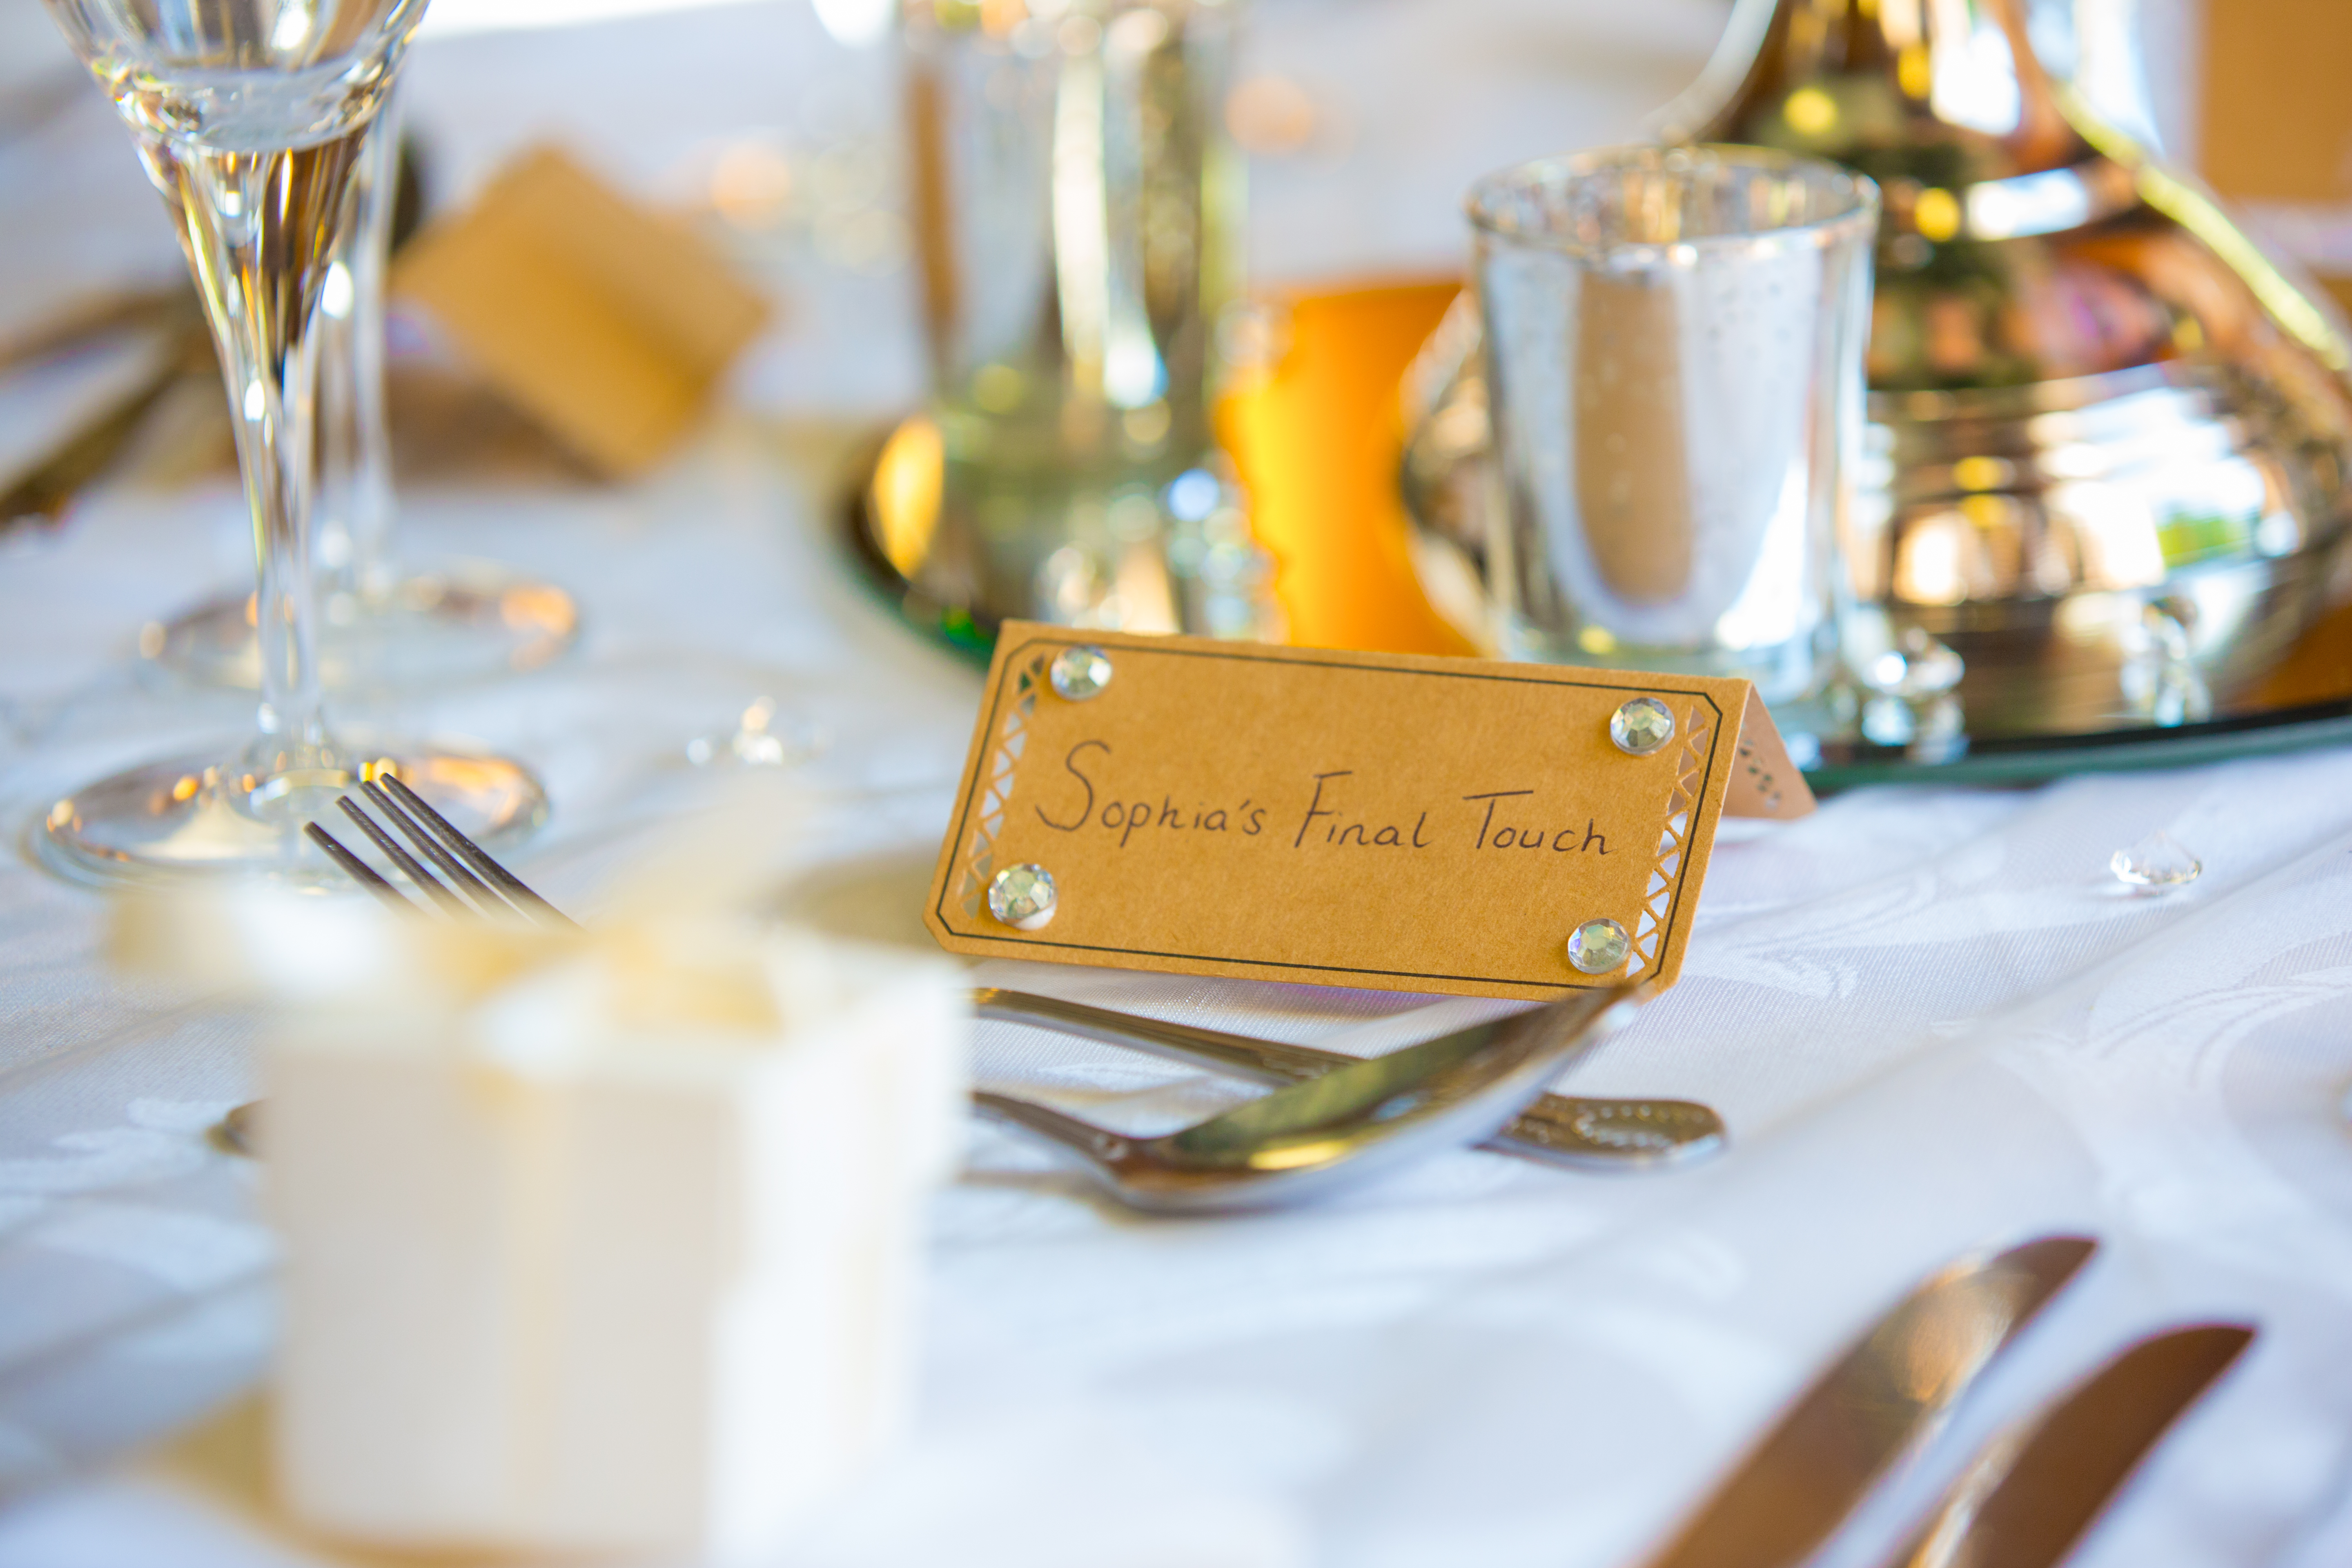 Rustic Place Cards with Gems - Sophia's Final Touch - Venue Styling - Weddings